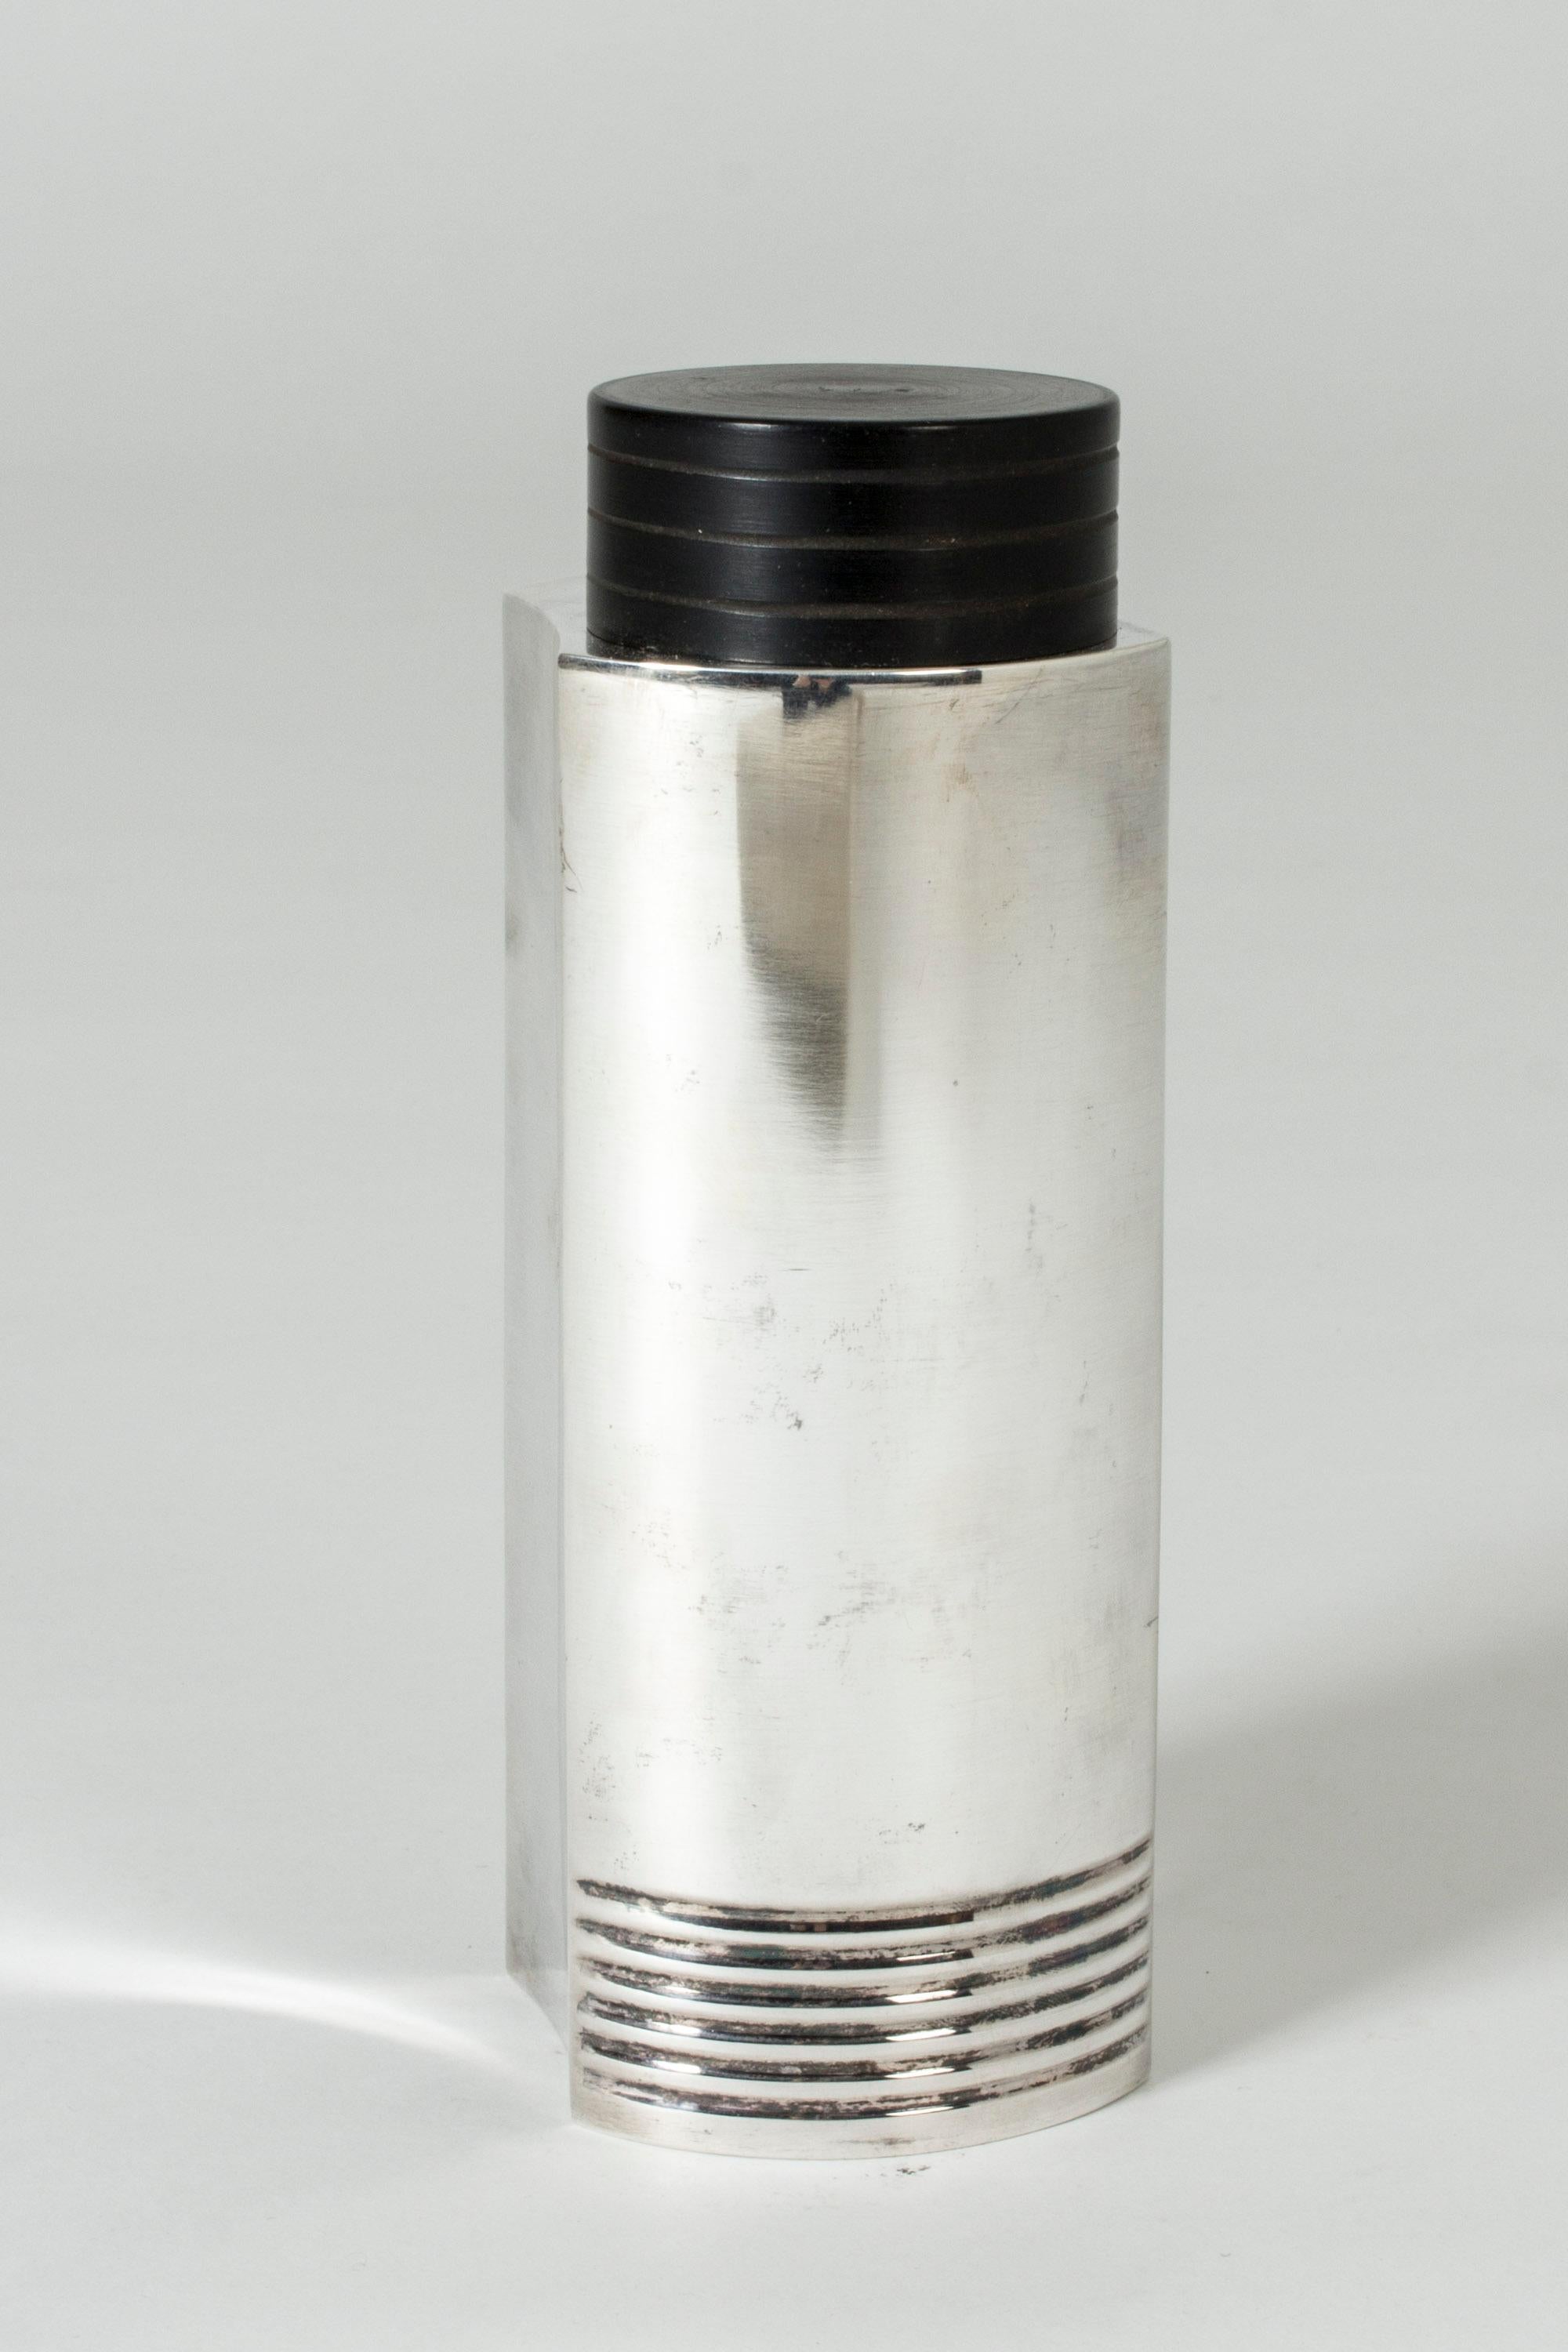 Silver plated cocktail Shaker with bakelite lid by Folke Arström for GAB. Designed in 1935, it has perfect functionalist lines and proportions and makes a striking decorative piece.